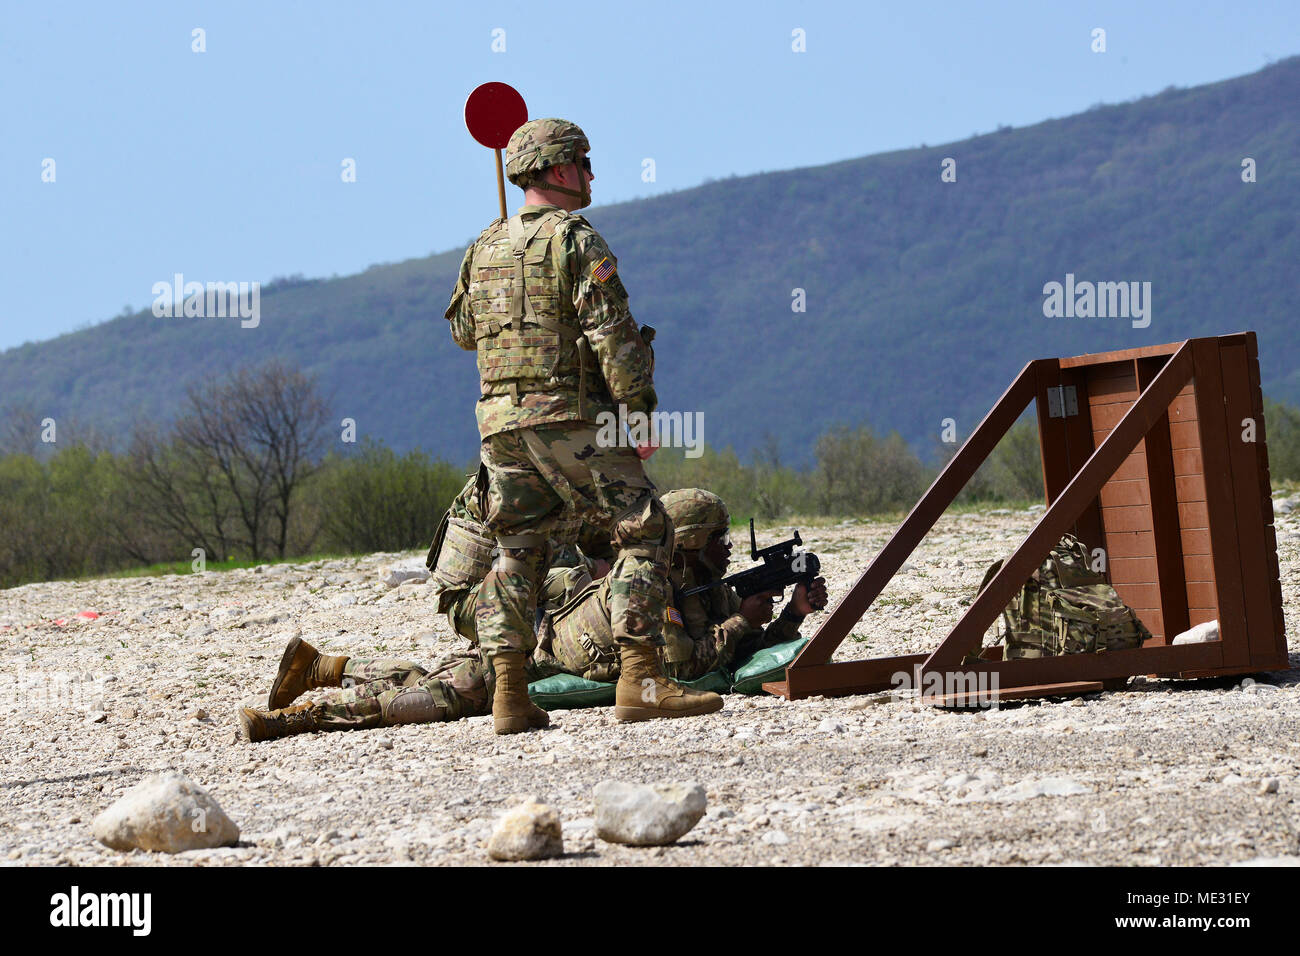 U.S. Army Paratrooper assigned to the Battalion Support Brigade, 173rd Airborne Brigade engages a targets with M320 grenade launcher module during weapons qualification at Cao Malnisio Range, Pordenone, Italy, April 17, 2018. The 173rd Airborne Brigade is the U.S. Army Contingency Response Force in Europe, capable of projecting ready forces anywhere in the U.S. European, Africa or Central Commands' areas of responsibility. (U.S. Army Photos by Paolo Bovo) Stock Photo